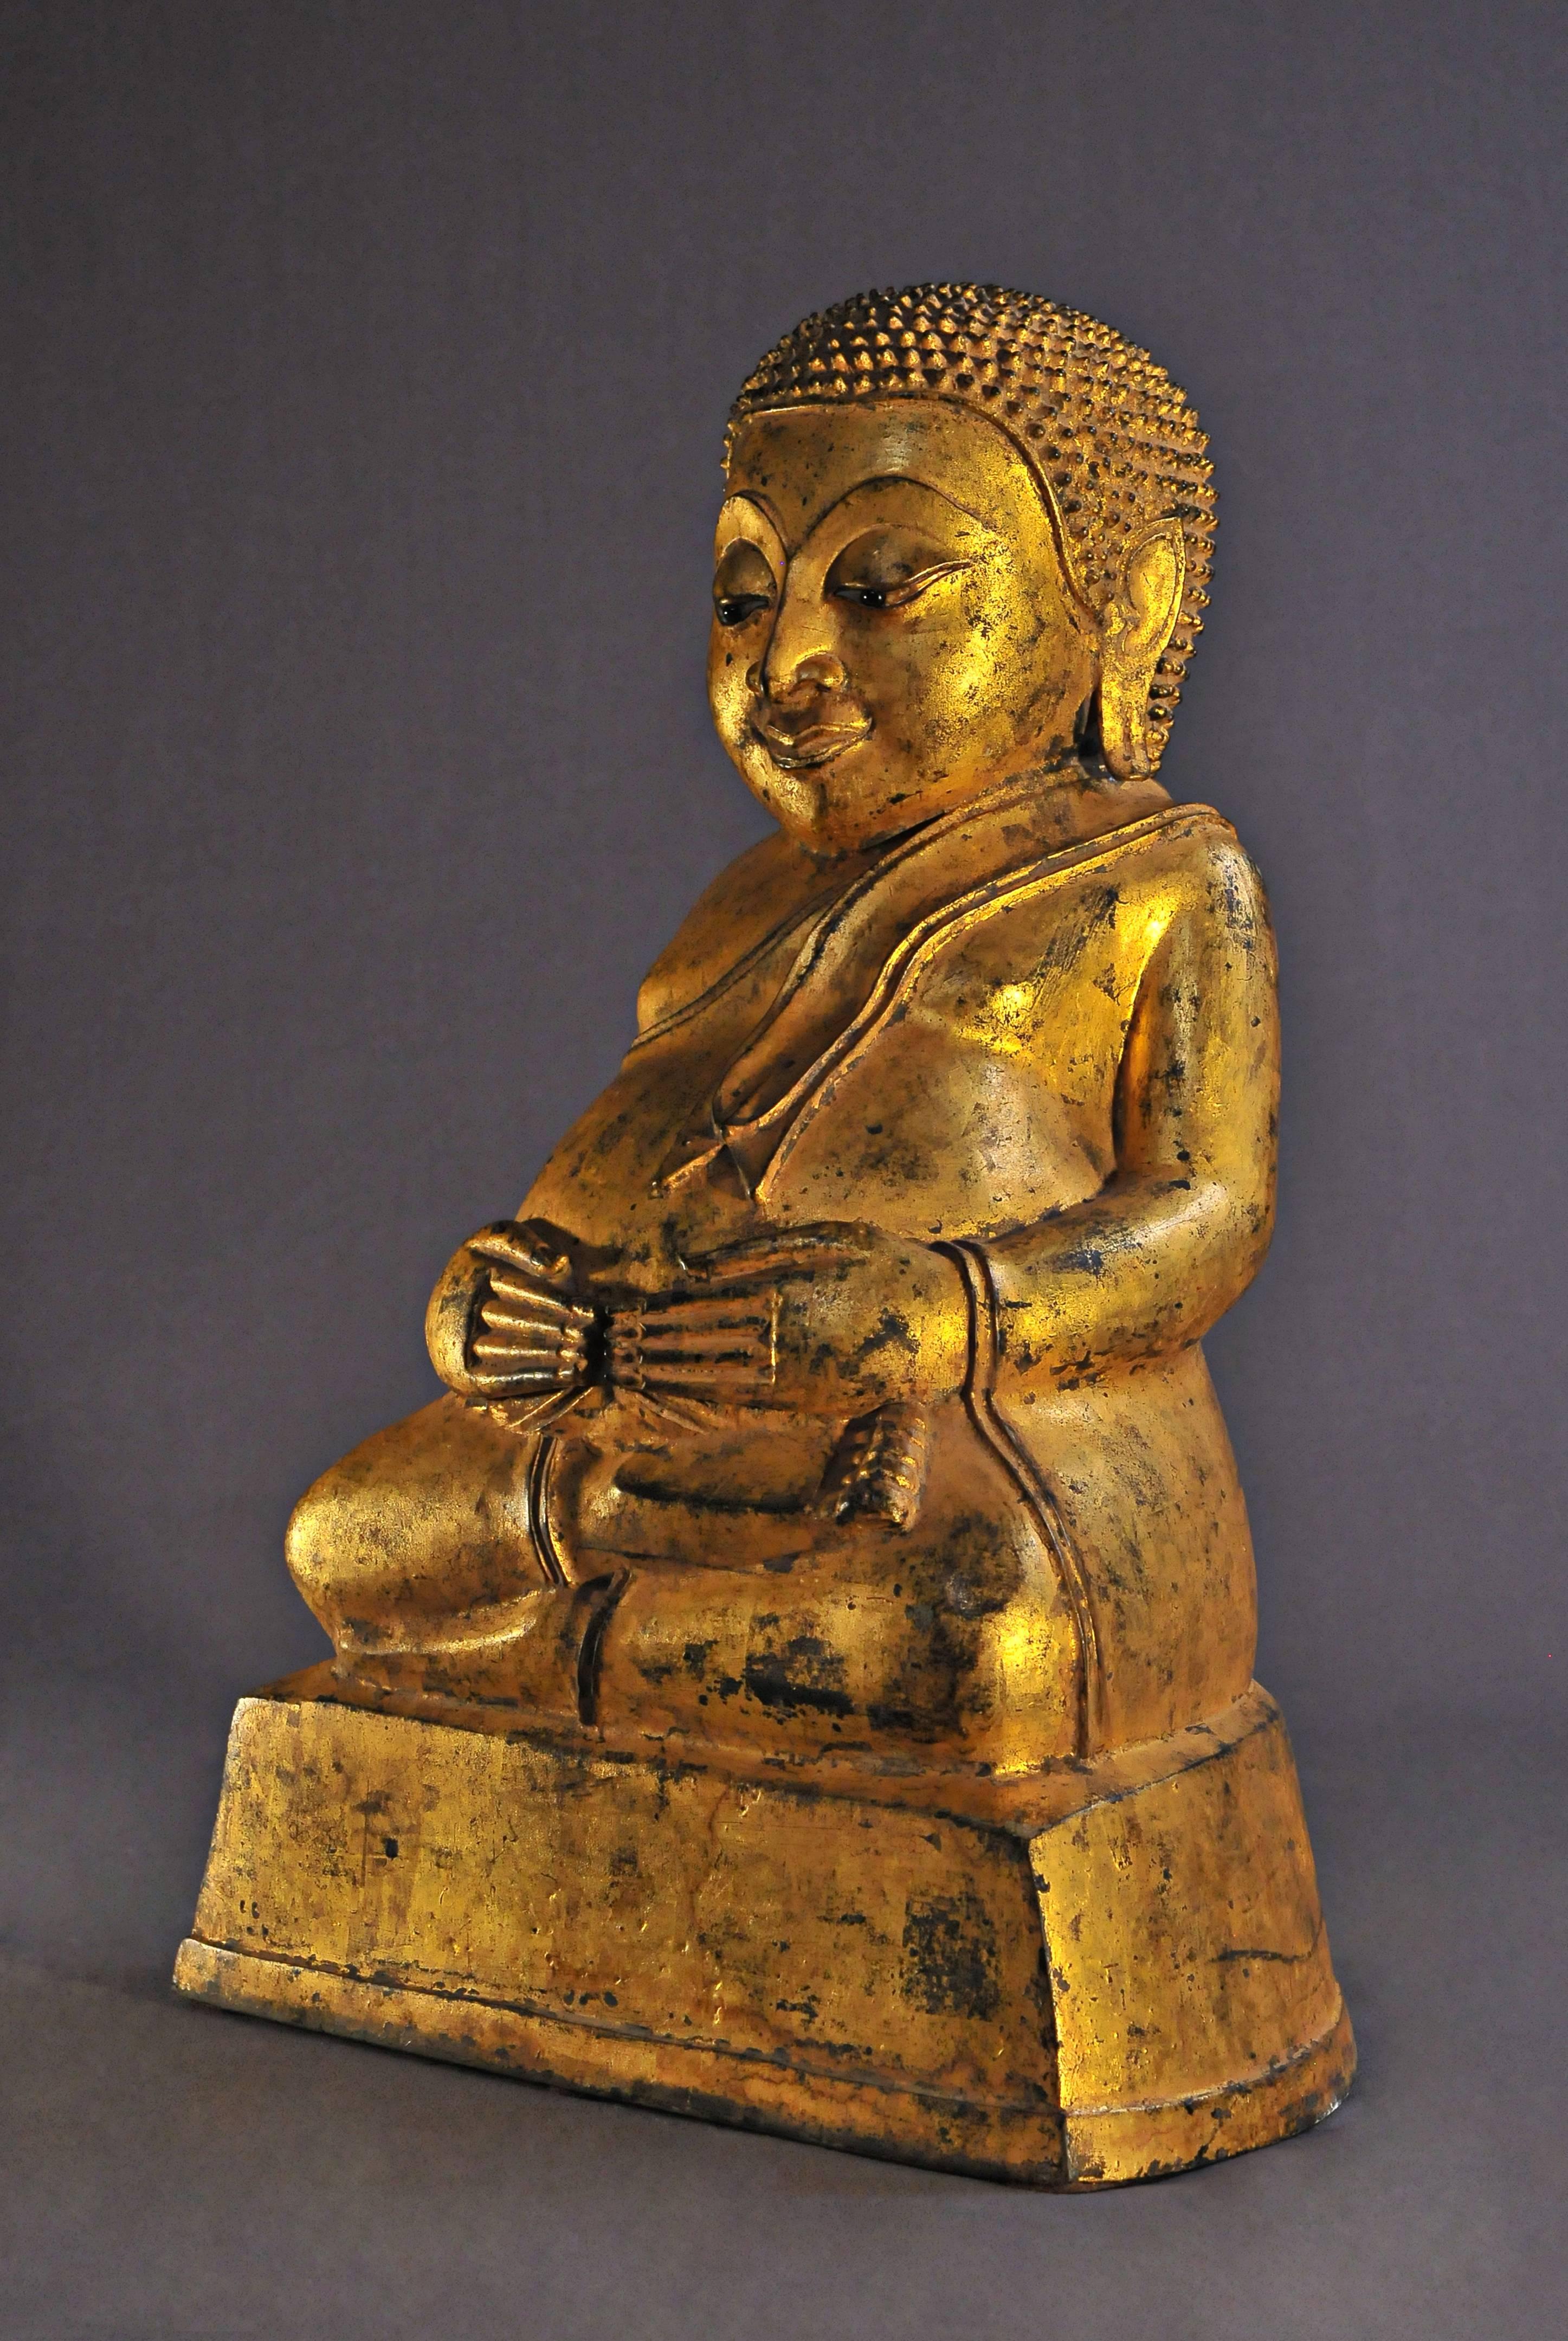 High place of Buddhism since the Hindu reaction in India, Burma marked a particular interest in pictures of Buddha.

The lovable fat, happy, laughing Buddha represents the ideals of good health, wealth, happiness, prosperity and longevity. He is